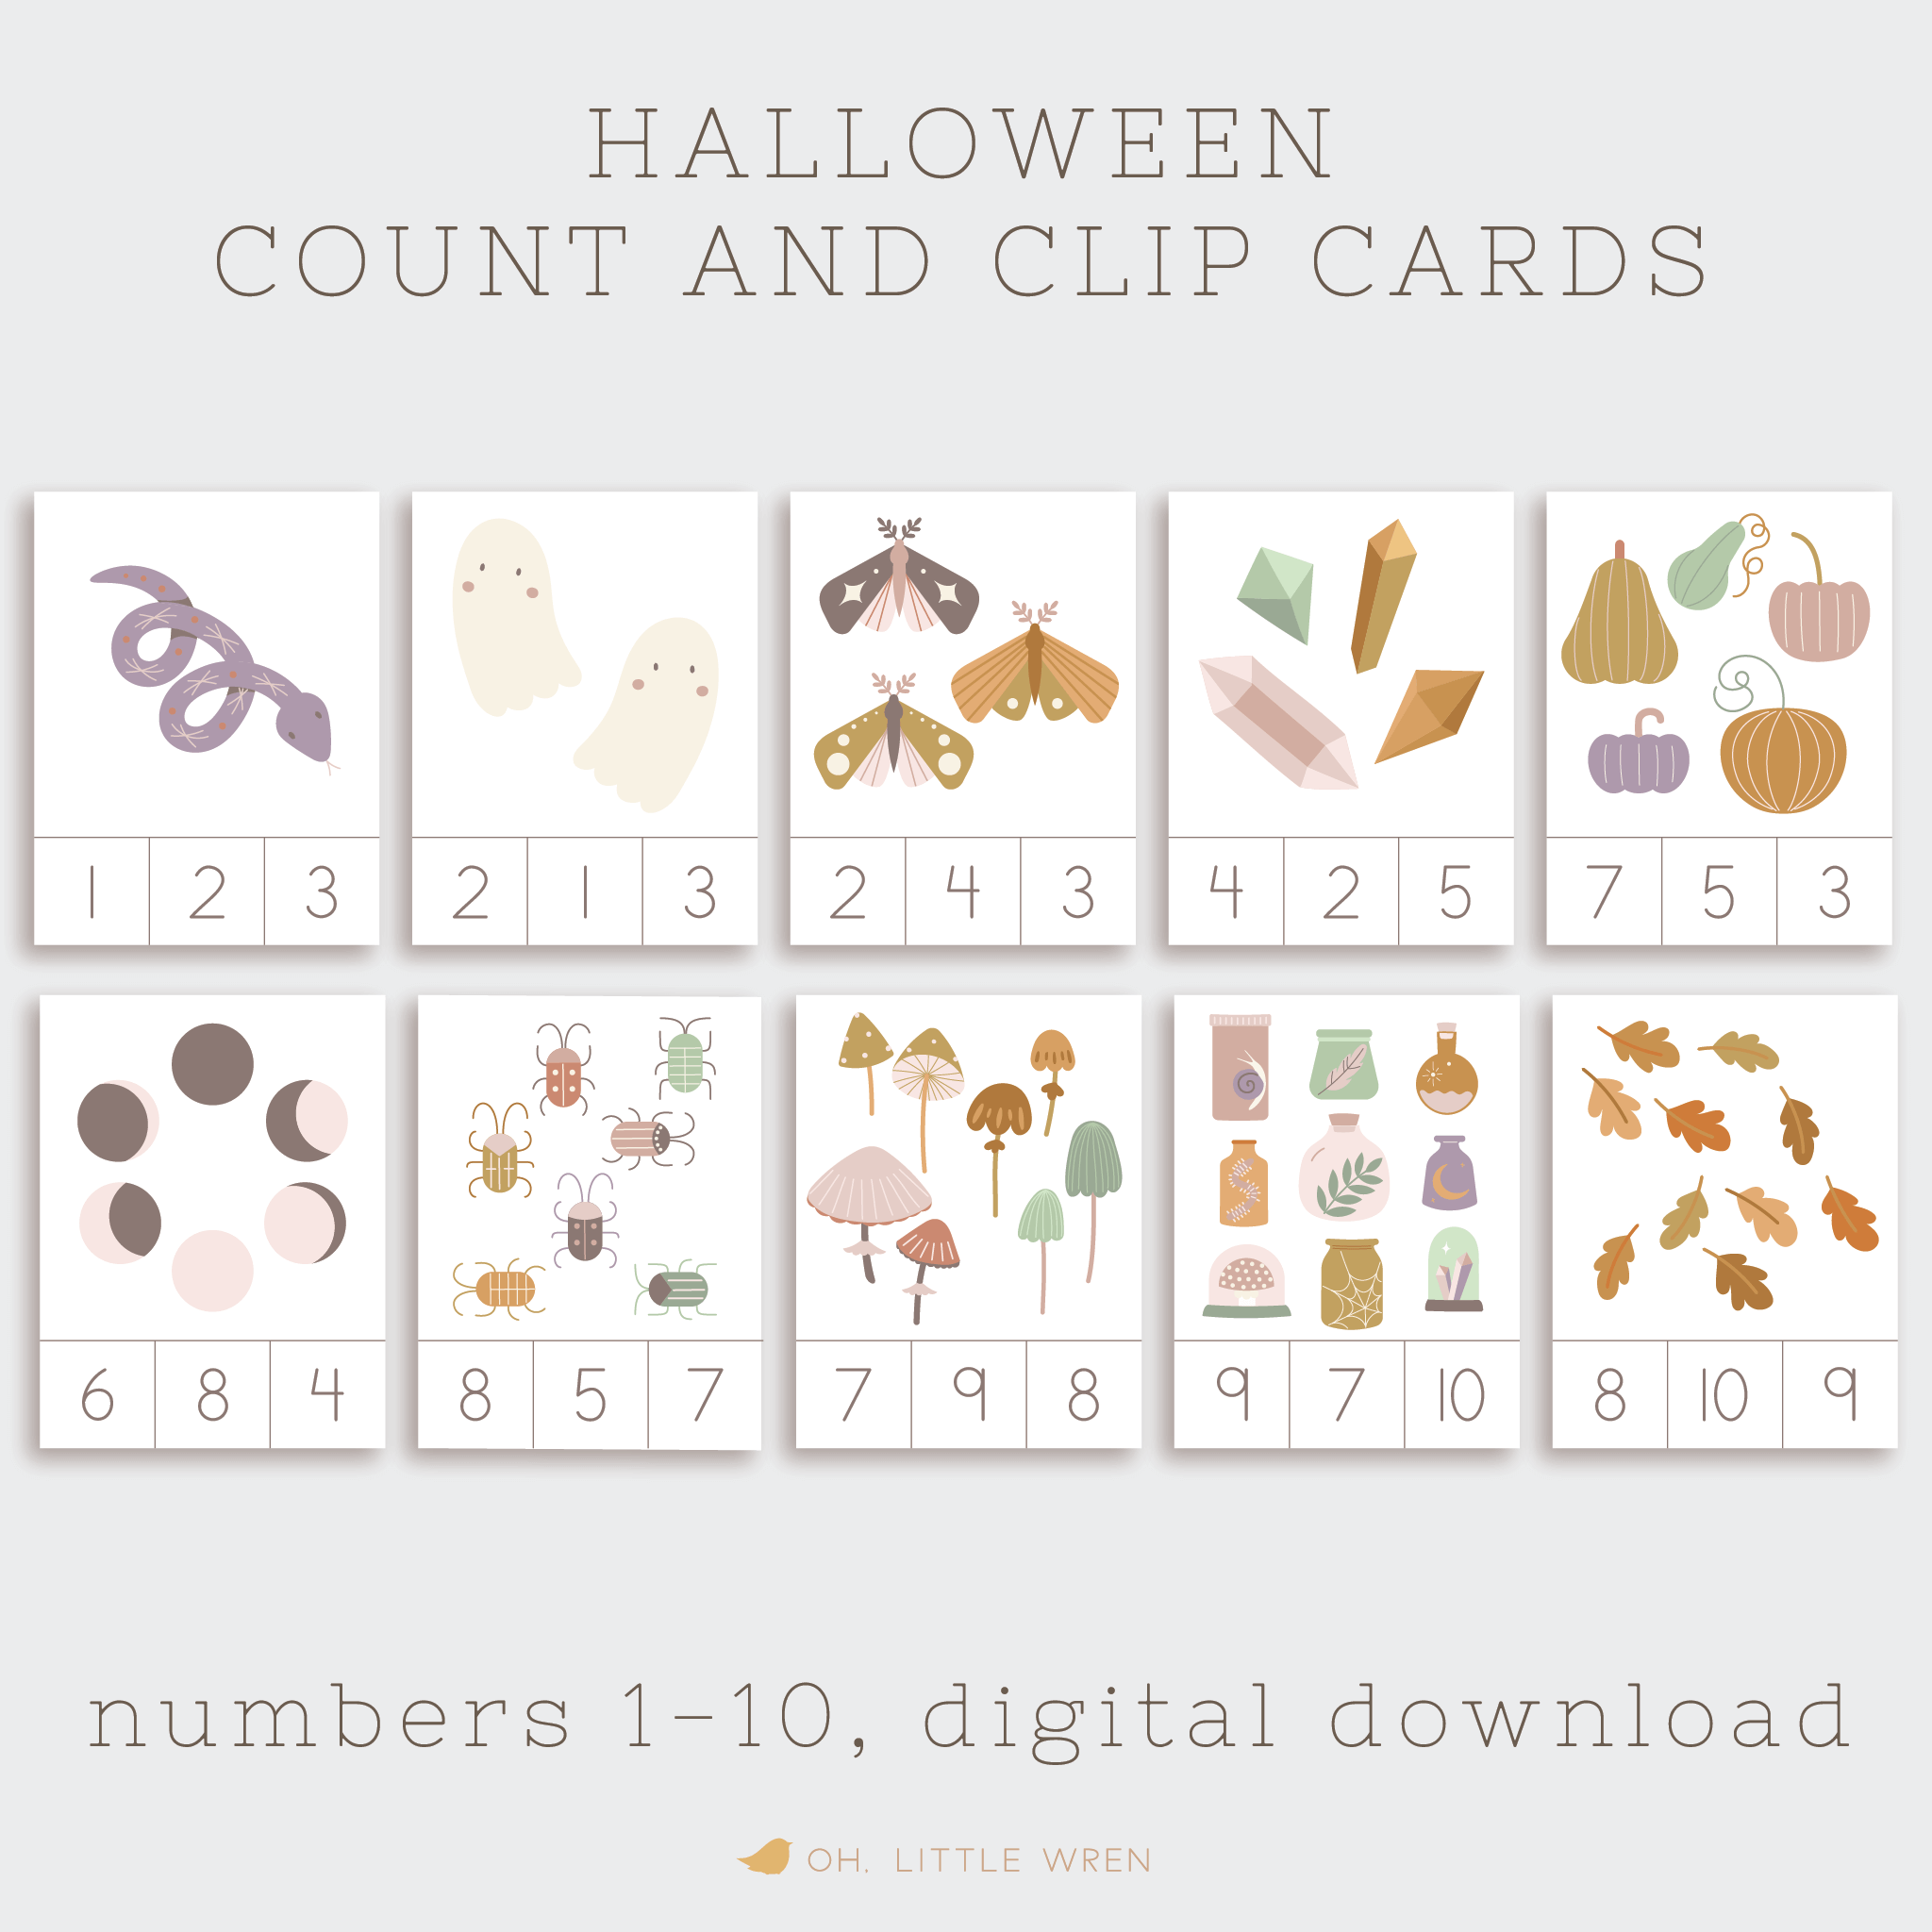 preschool counting and clip cards with halloween themed cute illustrations in muted colors.